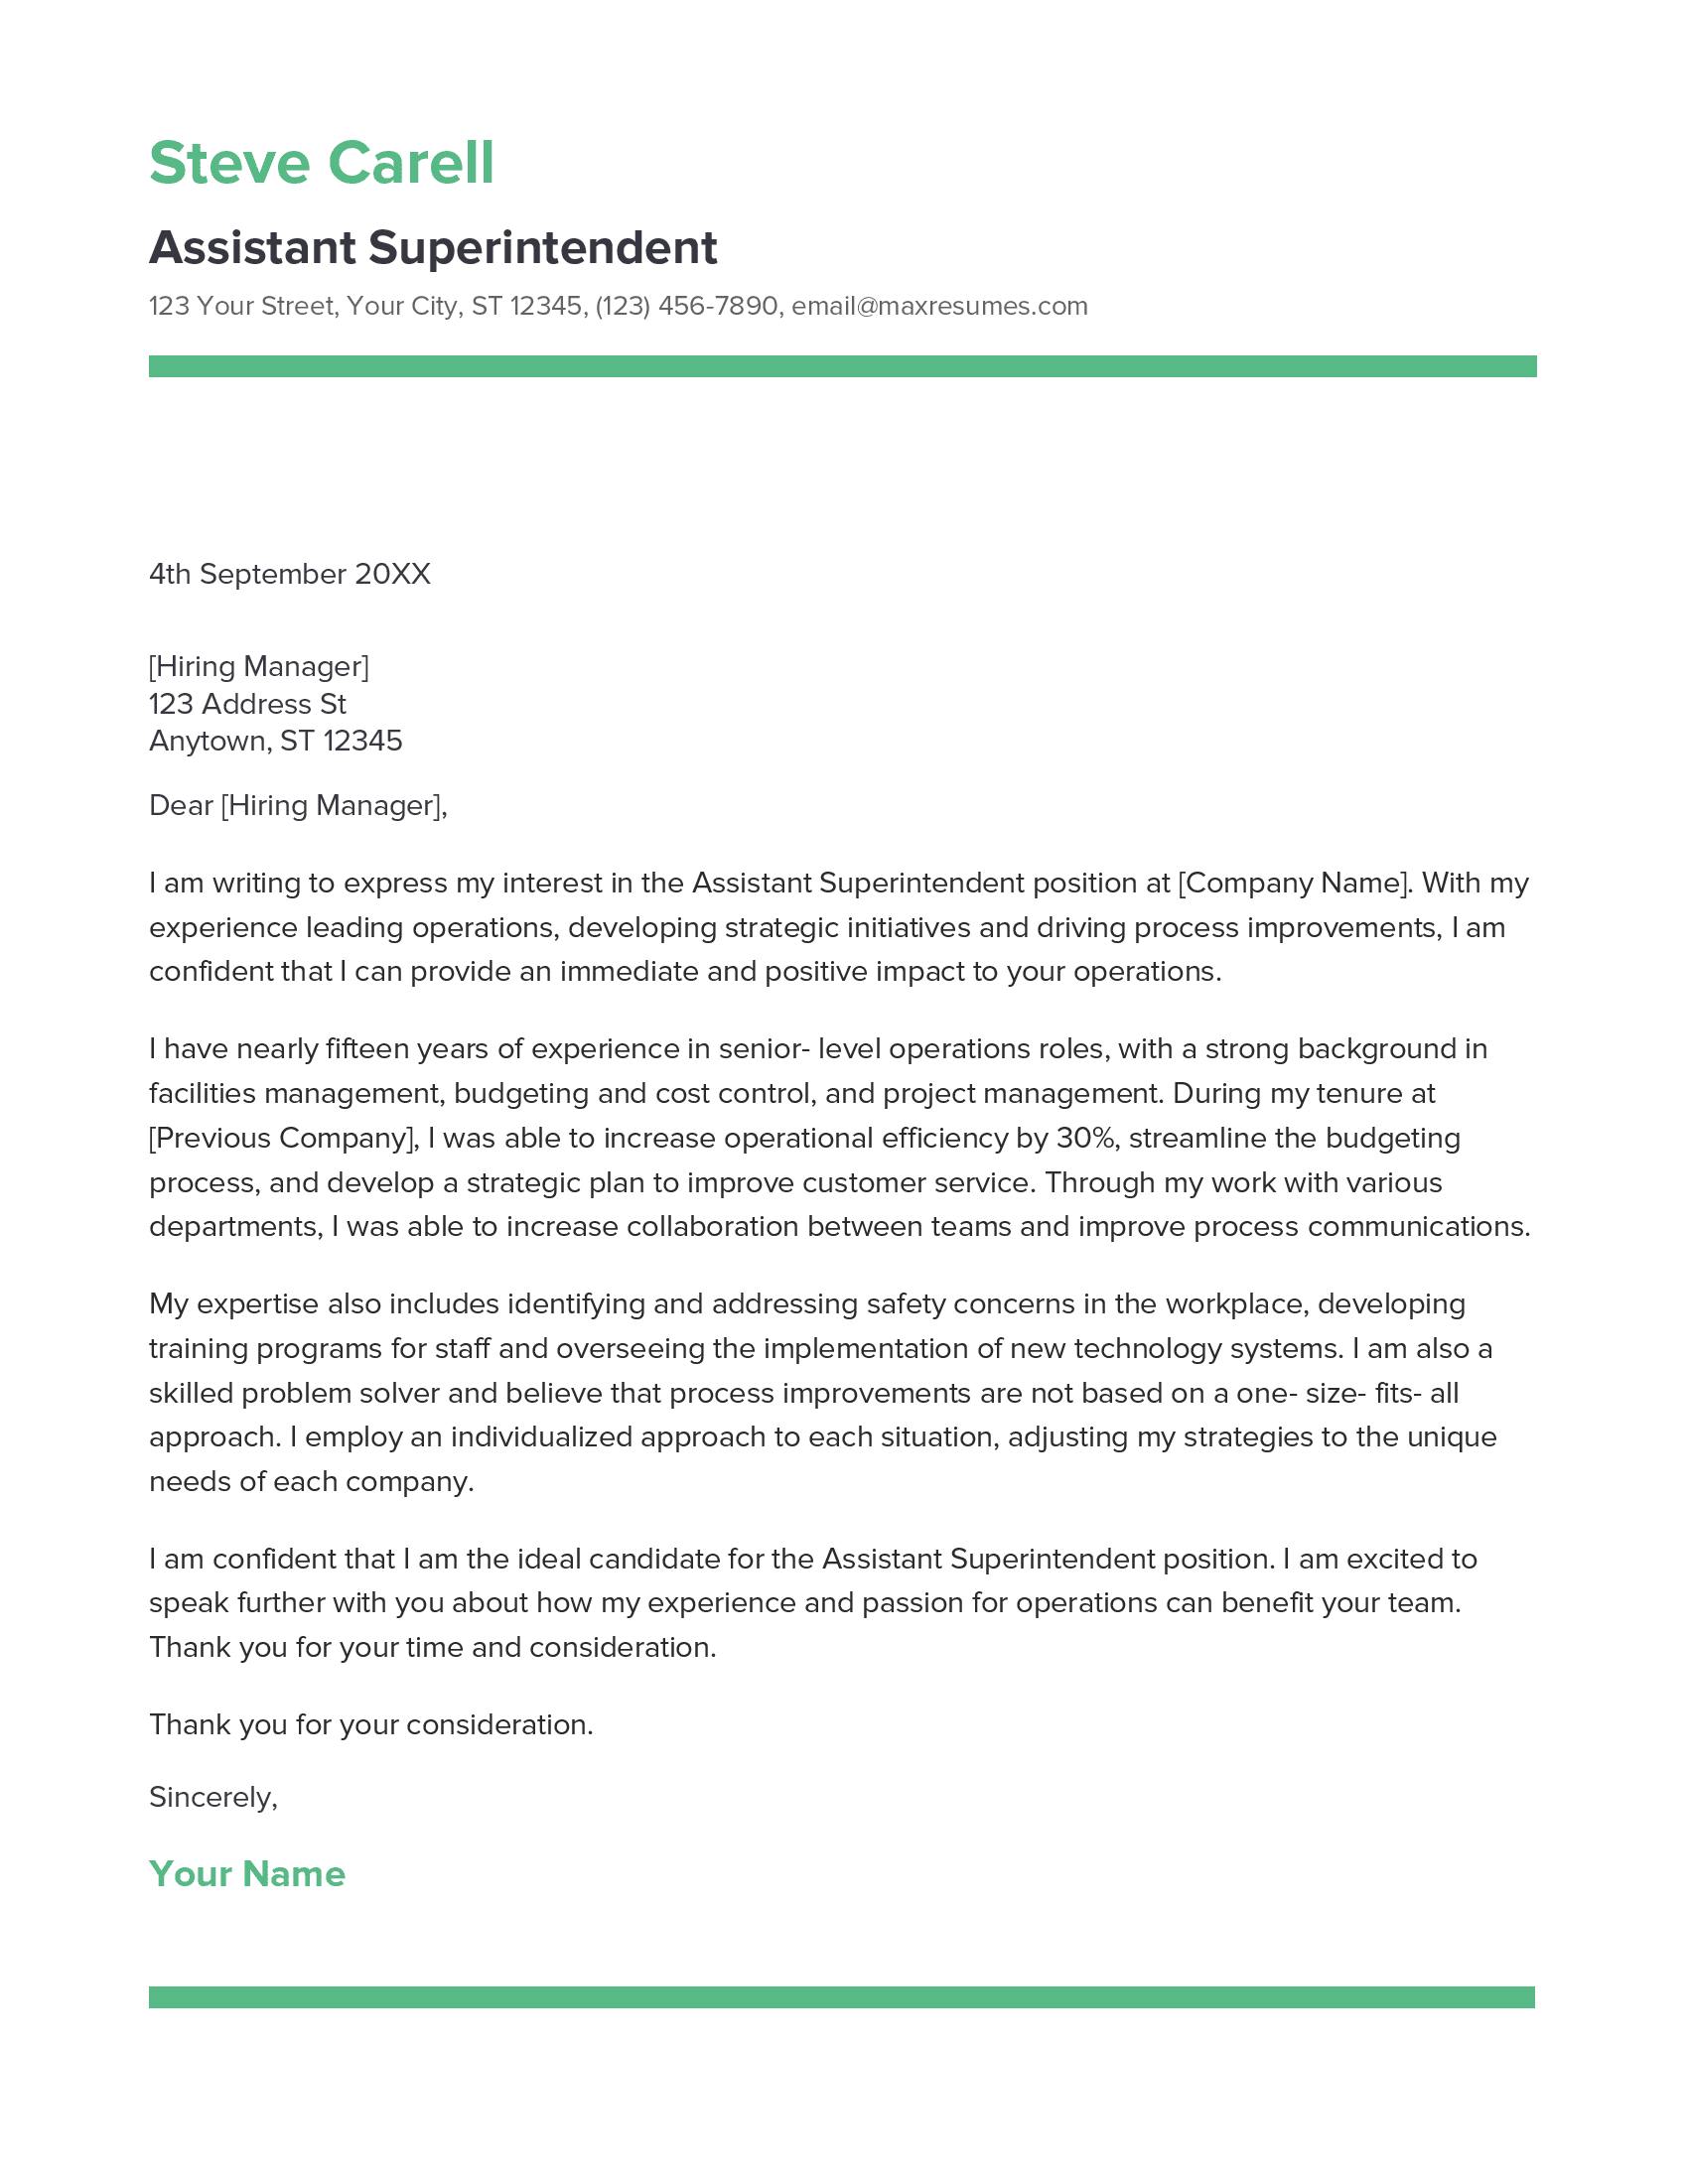 Assistant Superintendent Cover Letter Example